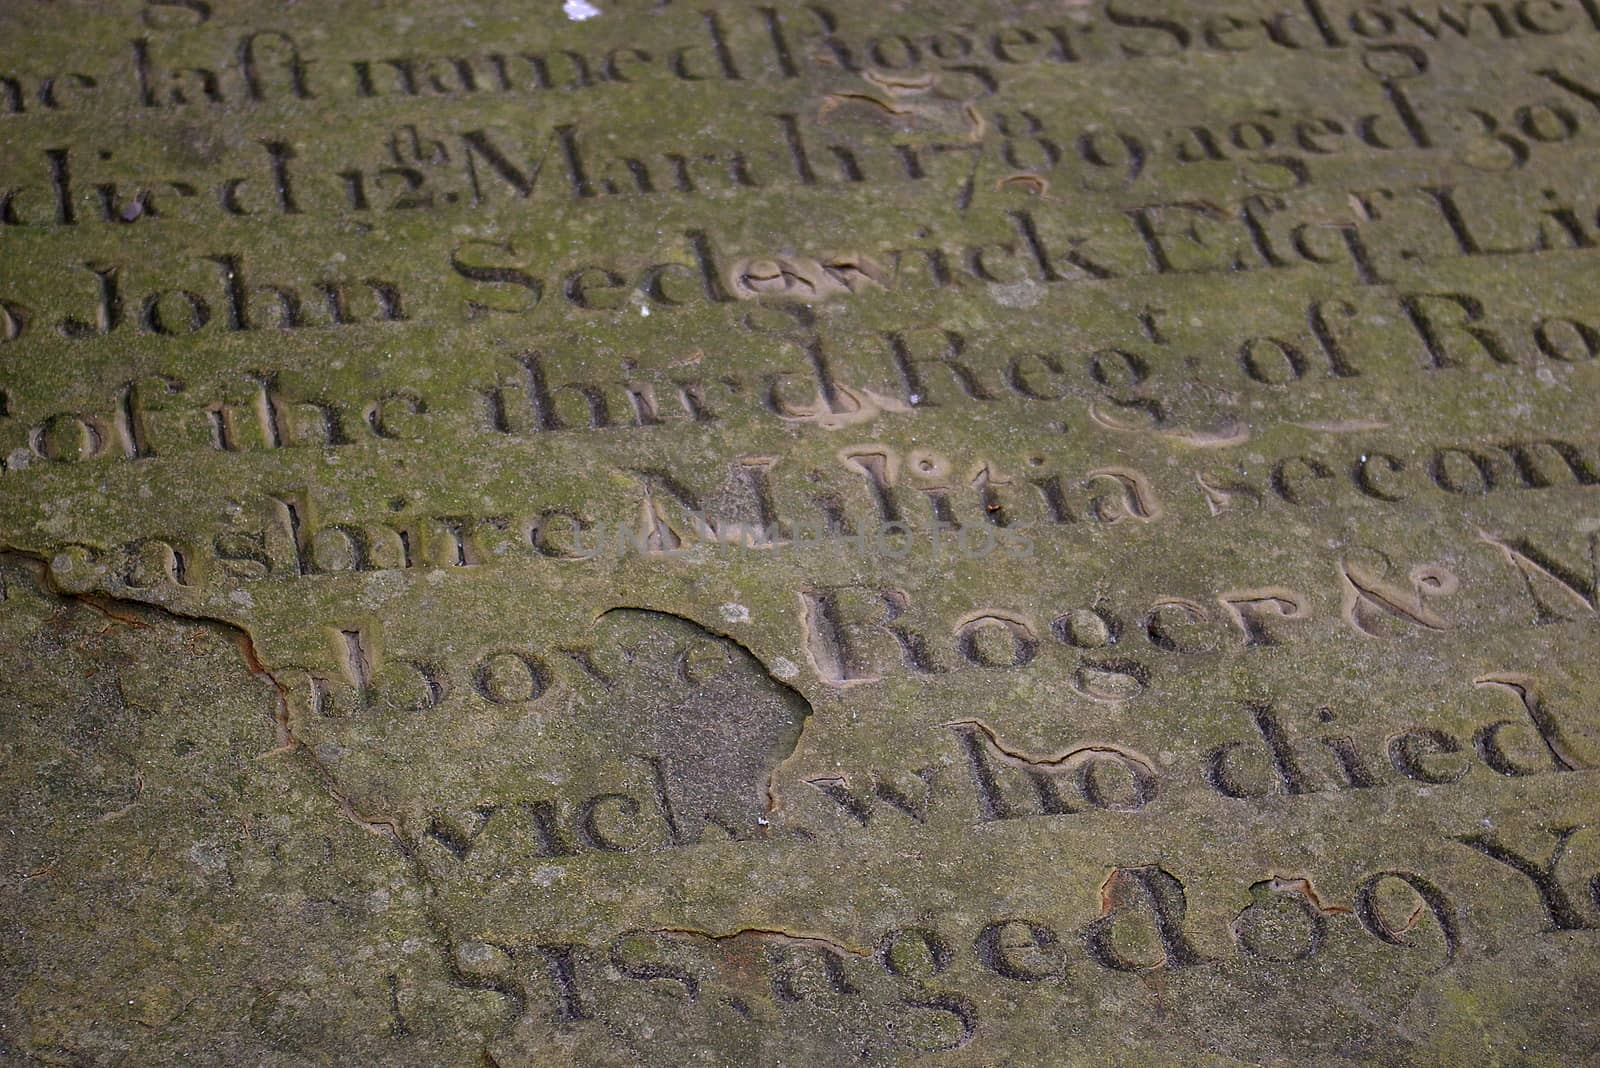 Weather-beaten old tombstone lettering in Manchester, UK